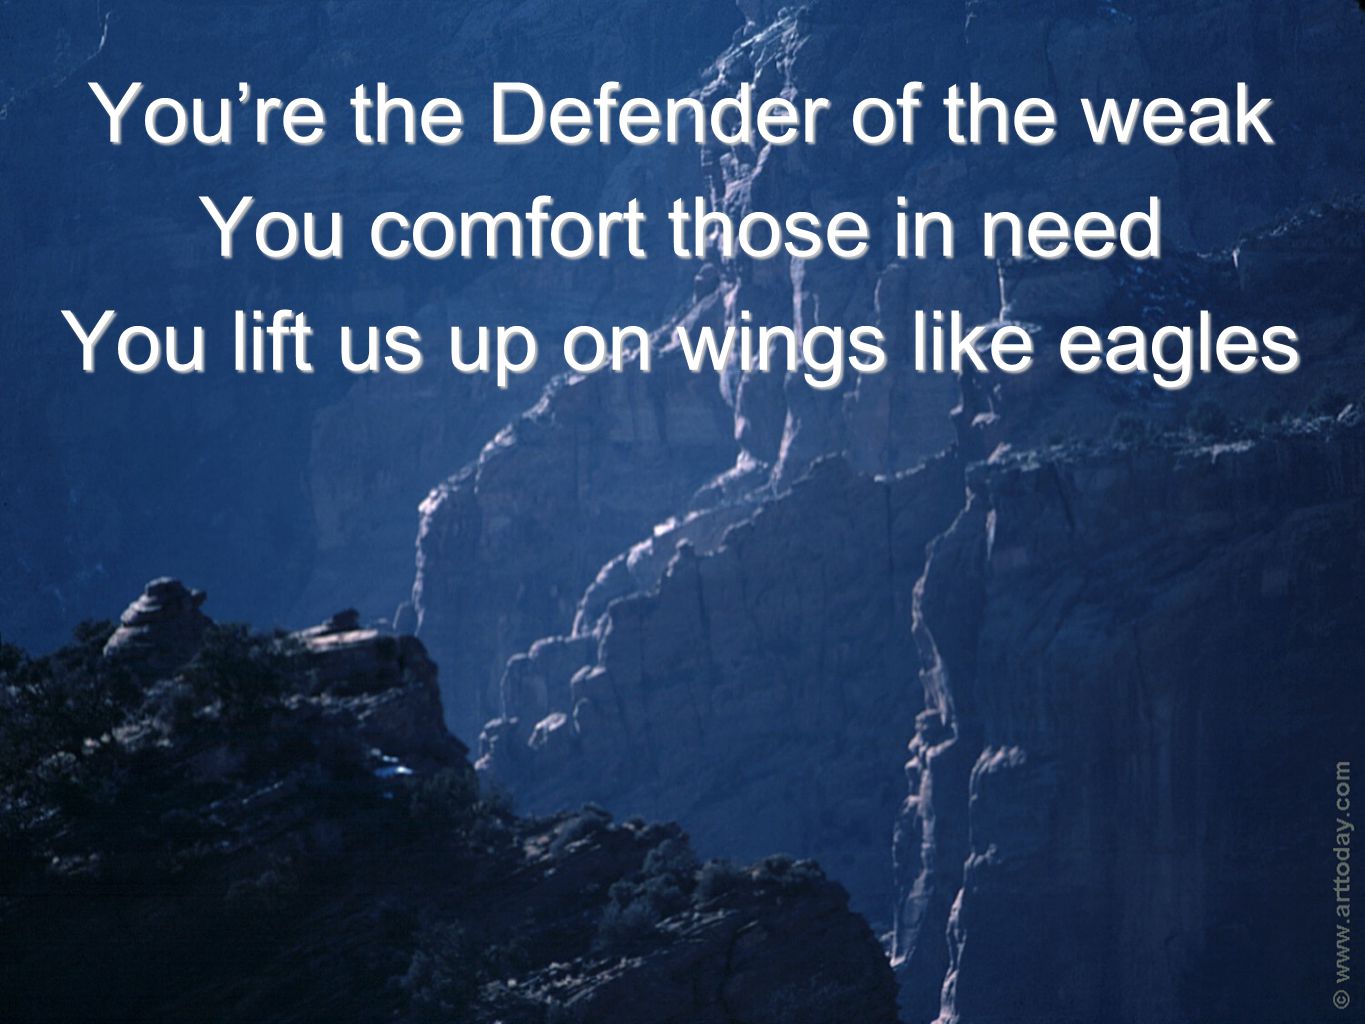 You’re the Defender of the weak You comfort those in need You lift us up on wings like eagles